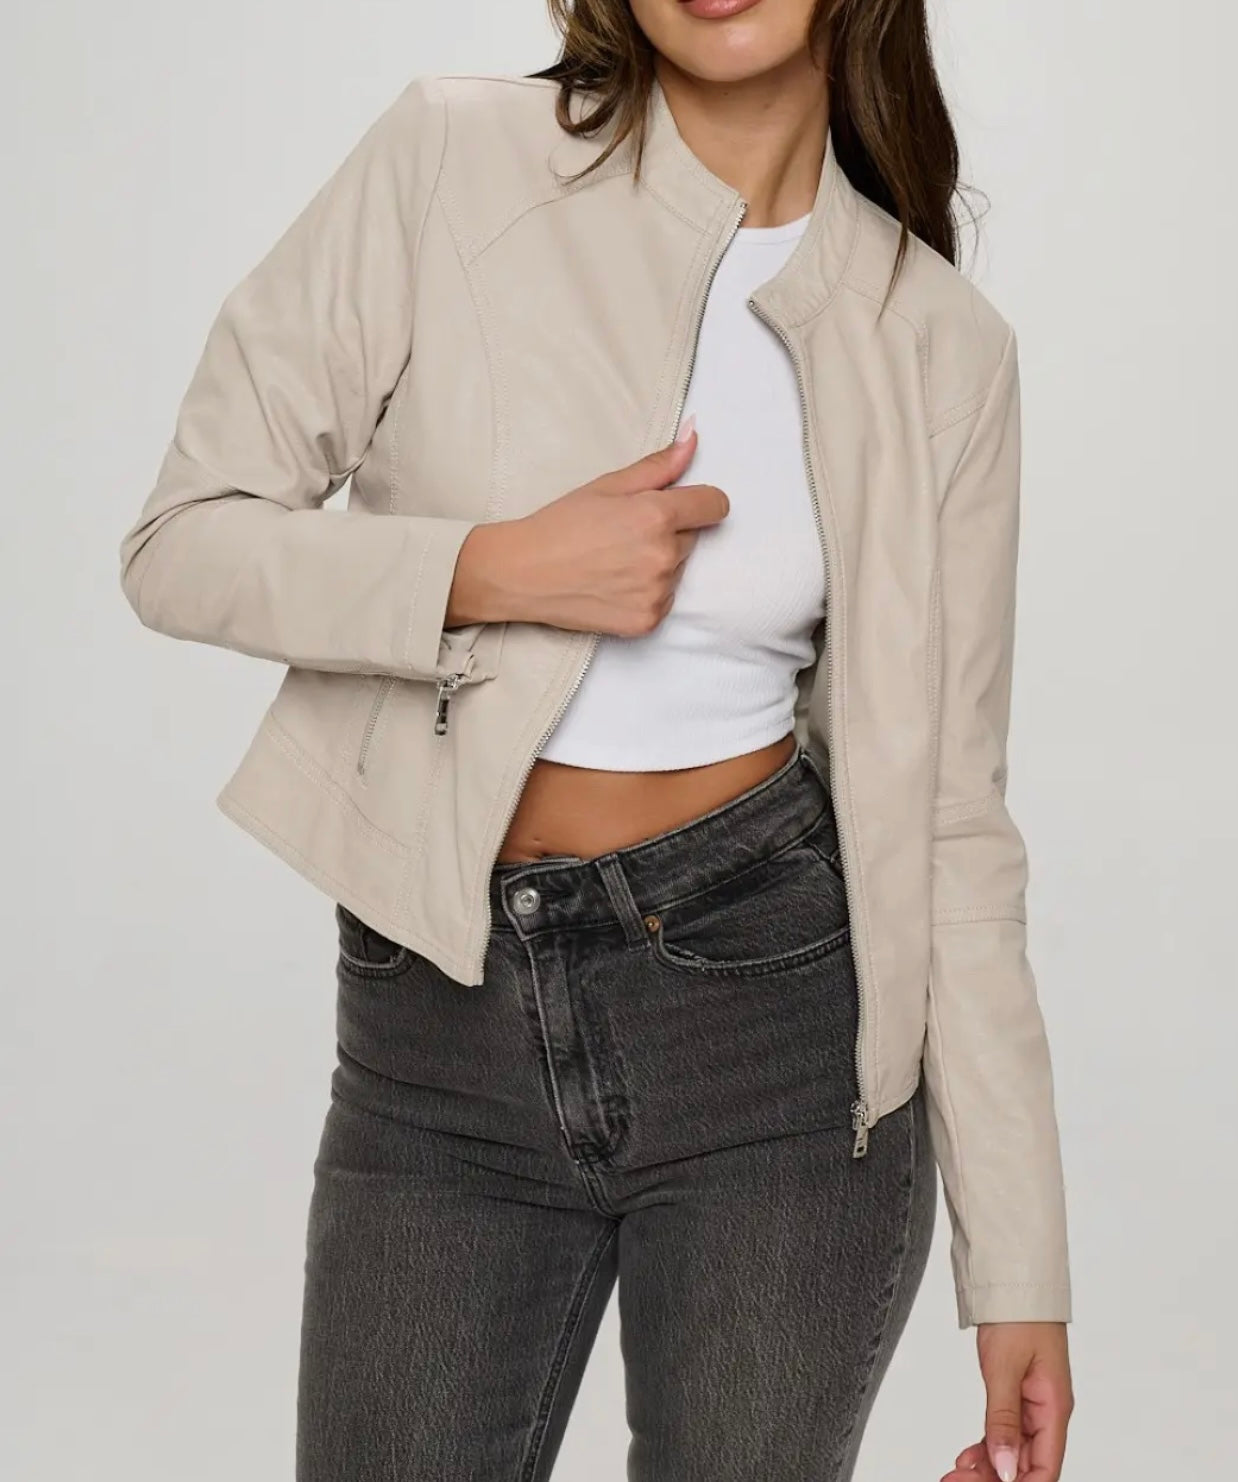 Classy Lady Cream Faux Leather Jacket